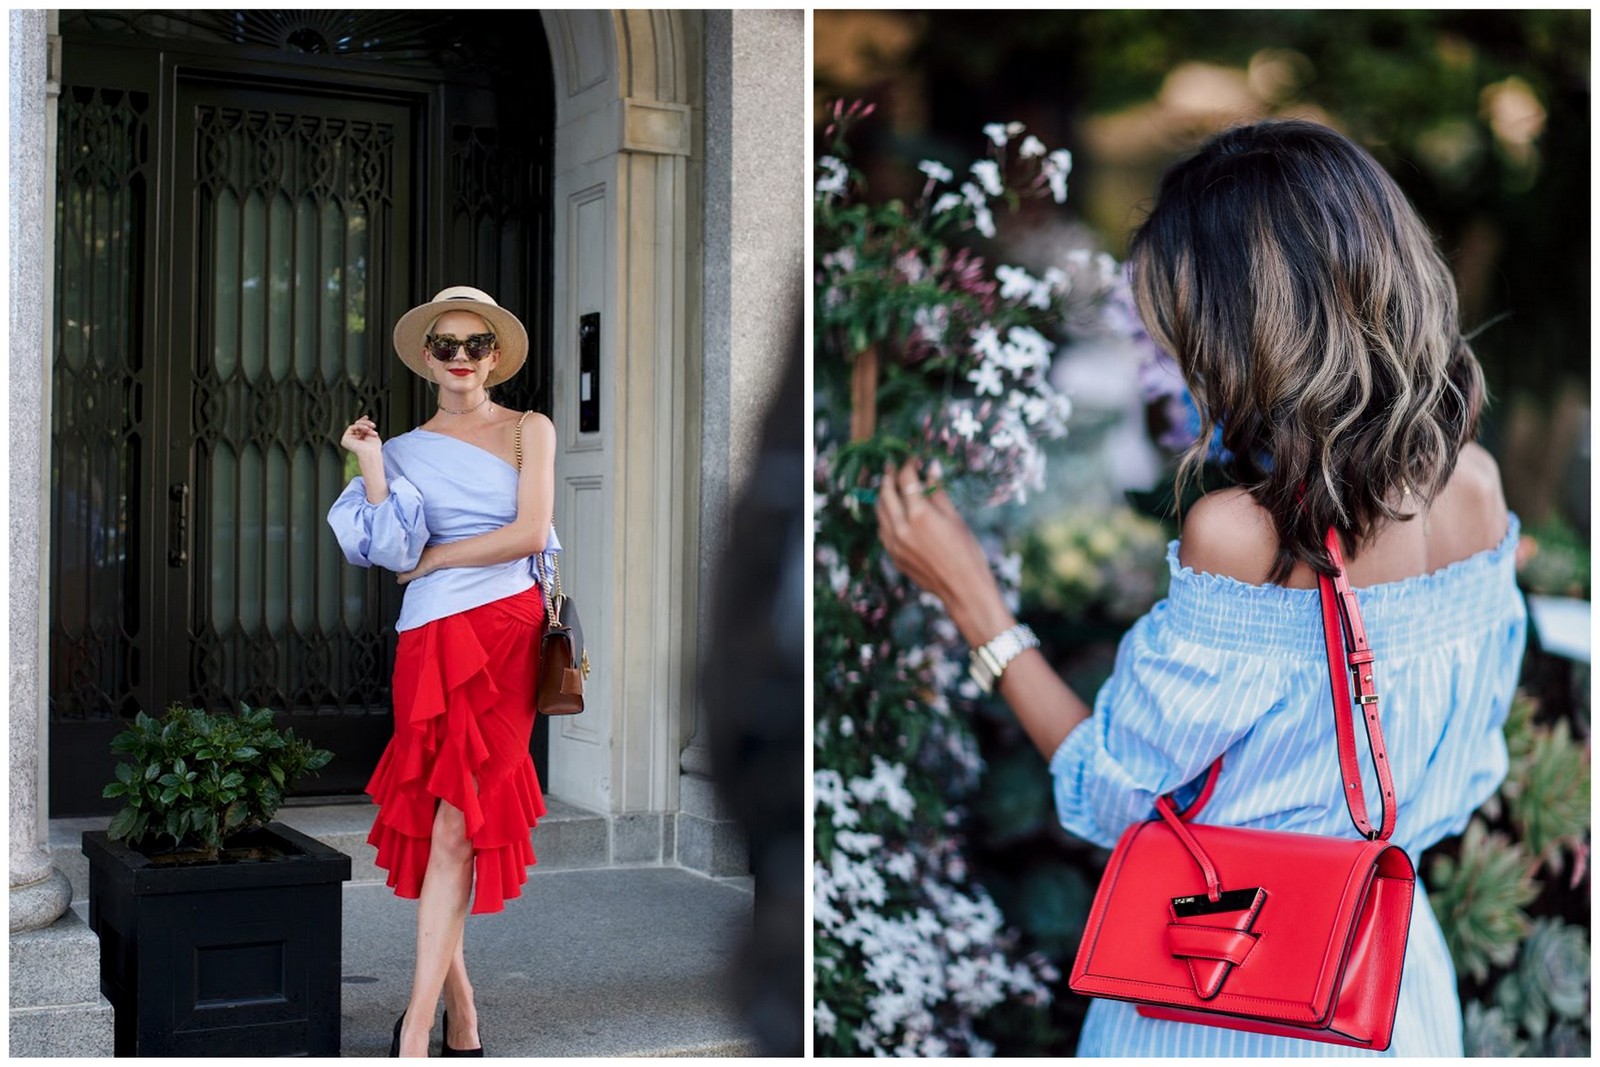 Fashion Inspiration for Off the Shoulder Tops 2017 [CoolChicStyleFashion]